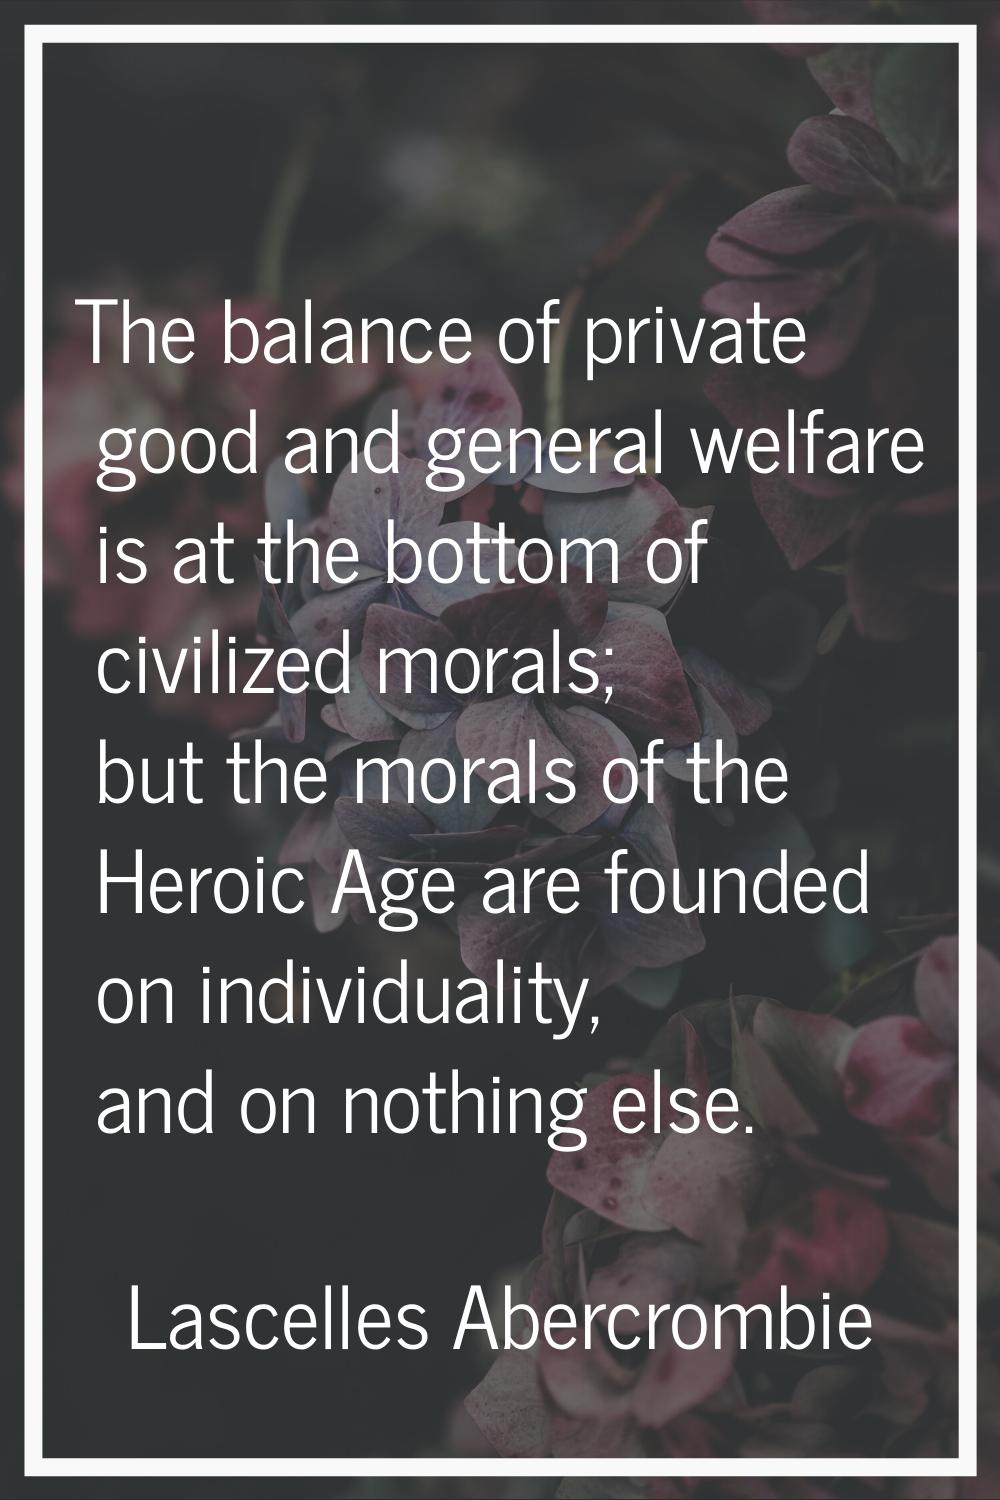 The balance of private good and general welfare is at the bottom of civilized morals; but the moral